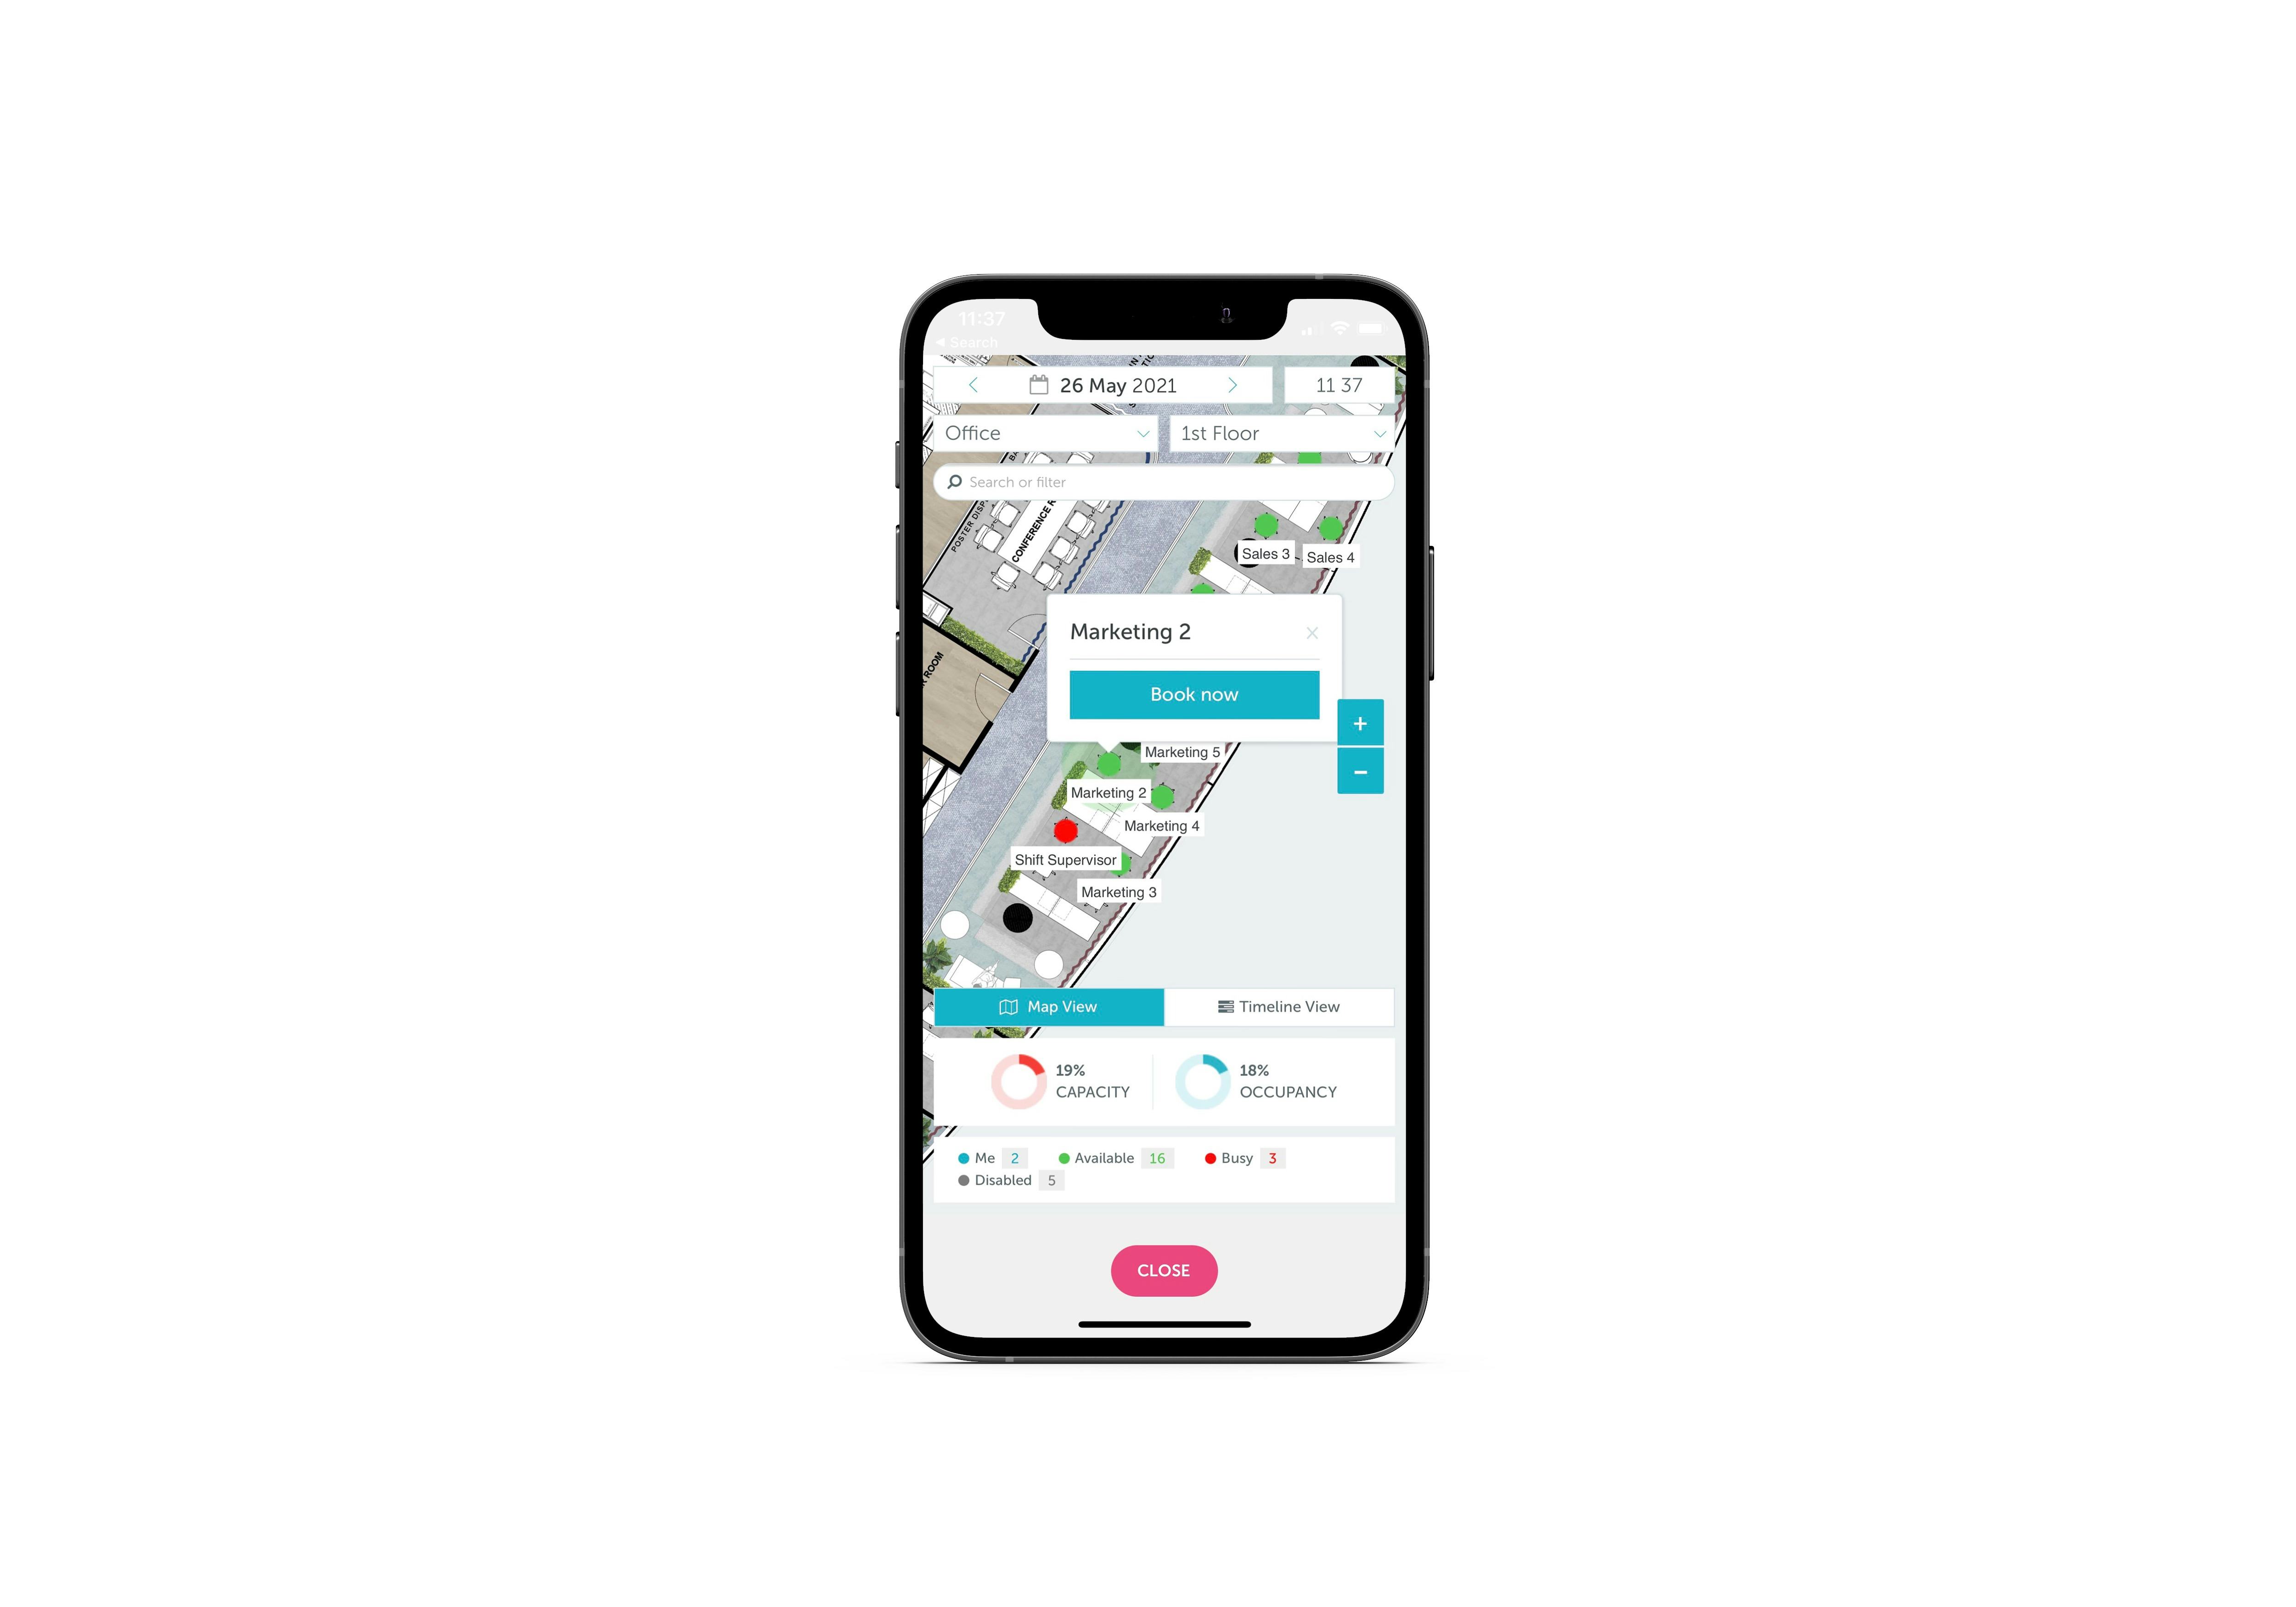 YAROOMS Software - YAROOMS Mobile makes rich scheduling capabilities available within a hand’s reach, in an easy-to-use application. Schedule your day wherever you are. Check in to spaces, answer workplace surveys and maintain full control over your personal agenda.